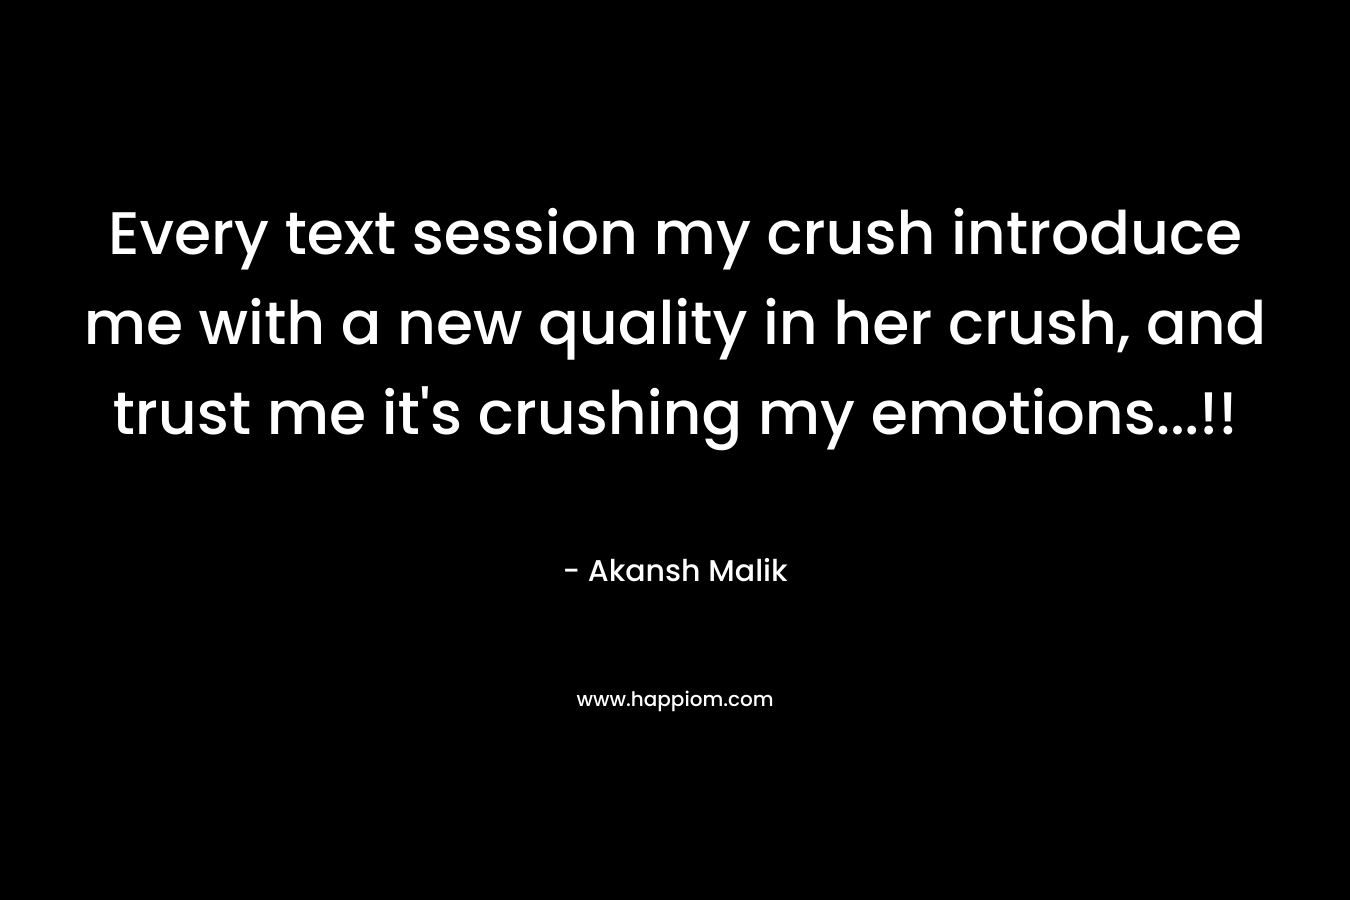 Every text session my crush introduce me with a new quality in her crush, and trust me it's crushing my emotions...!!